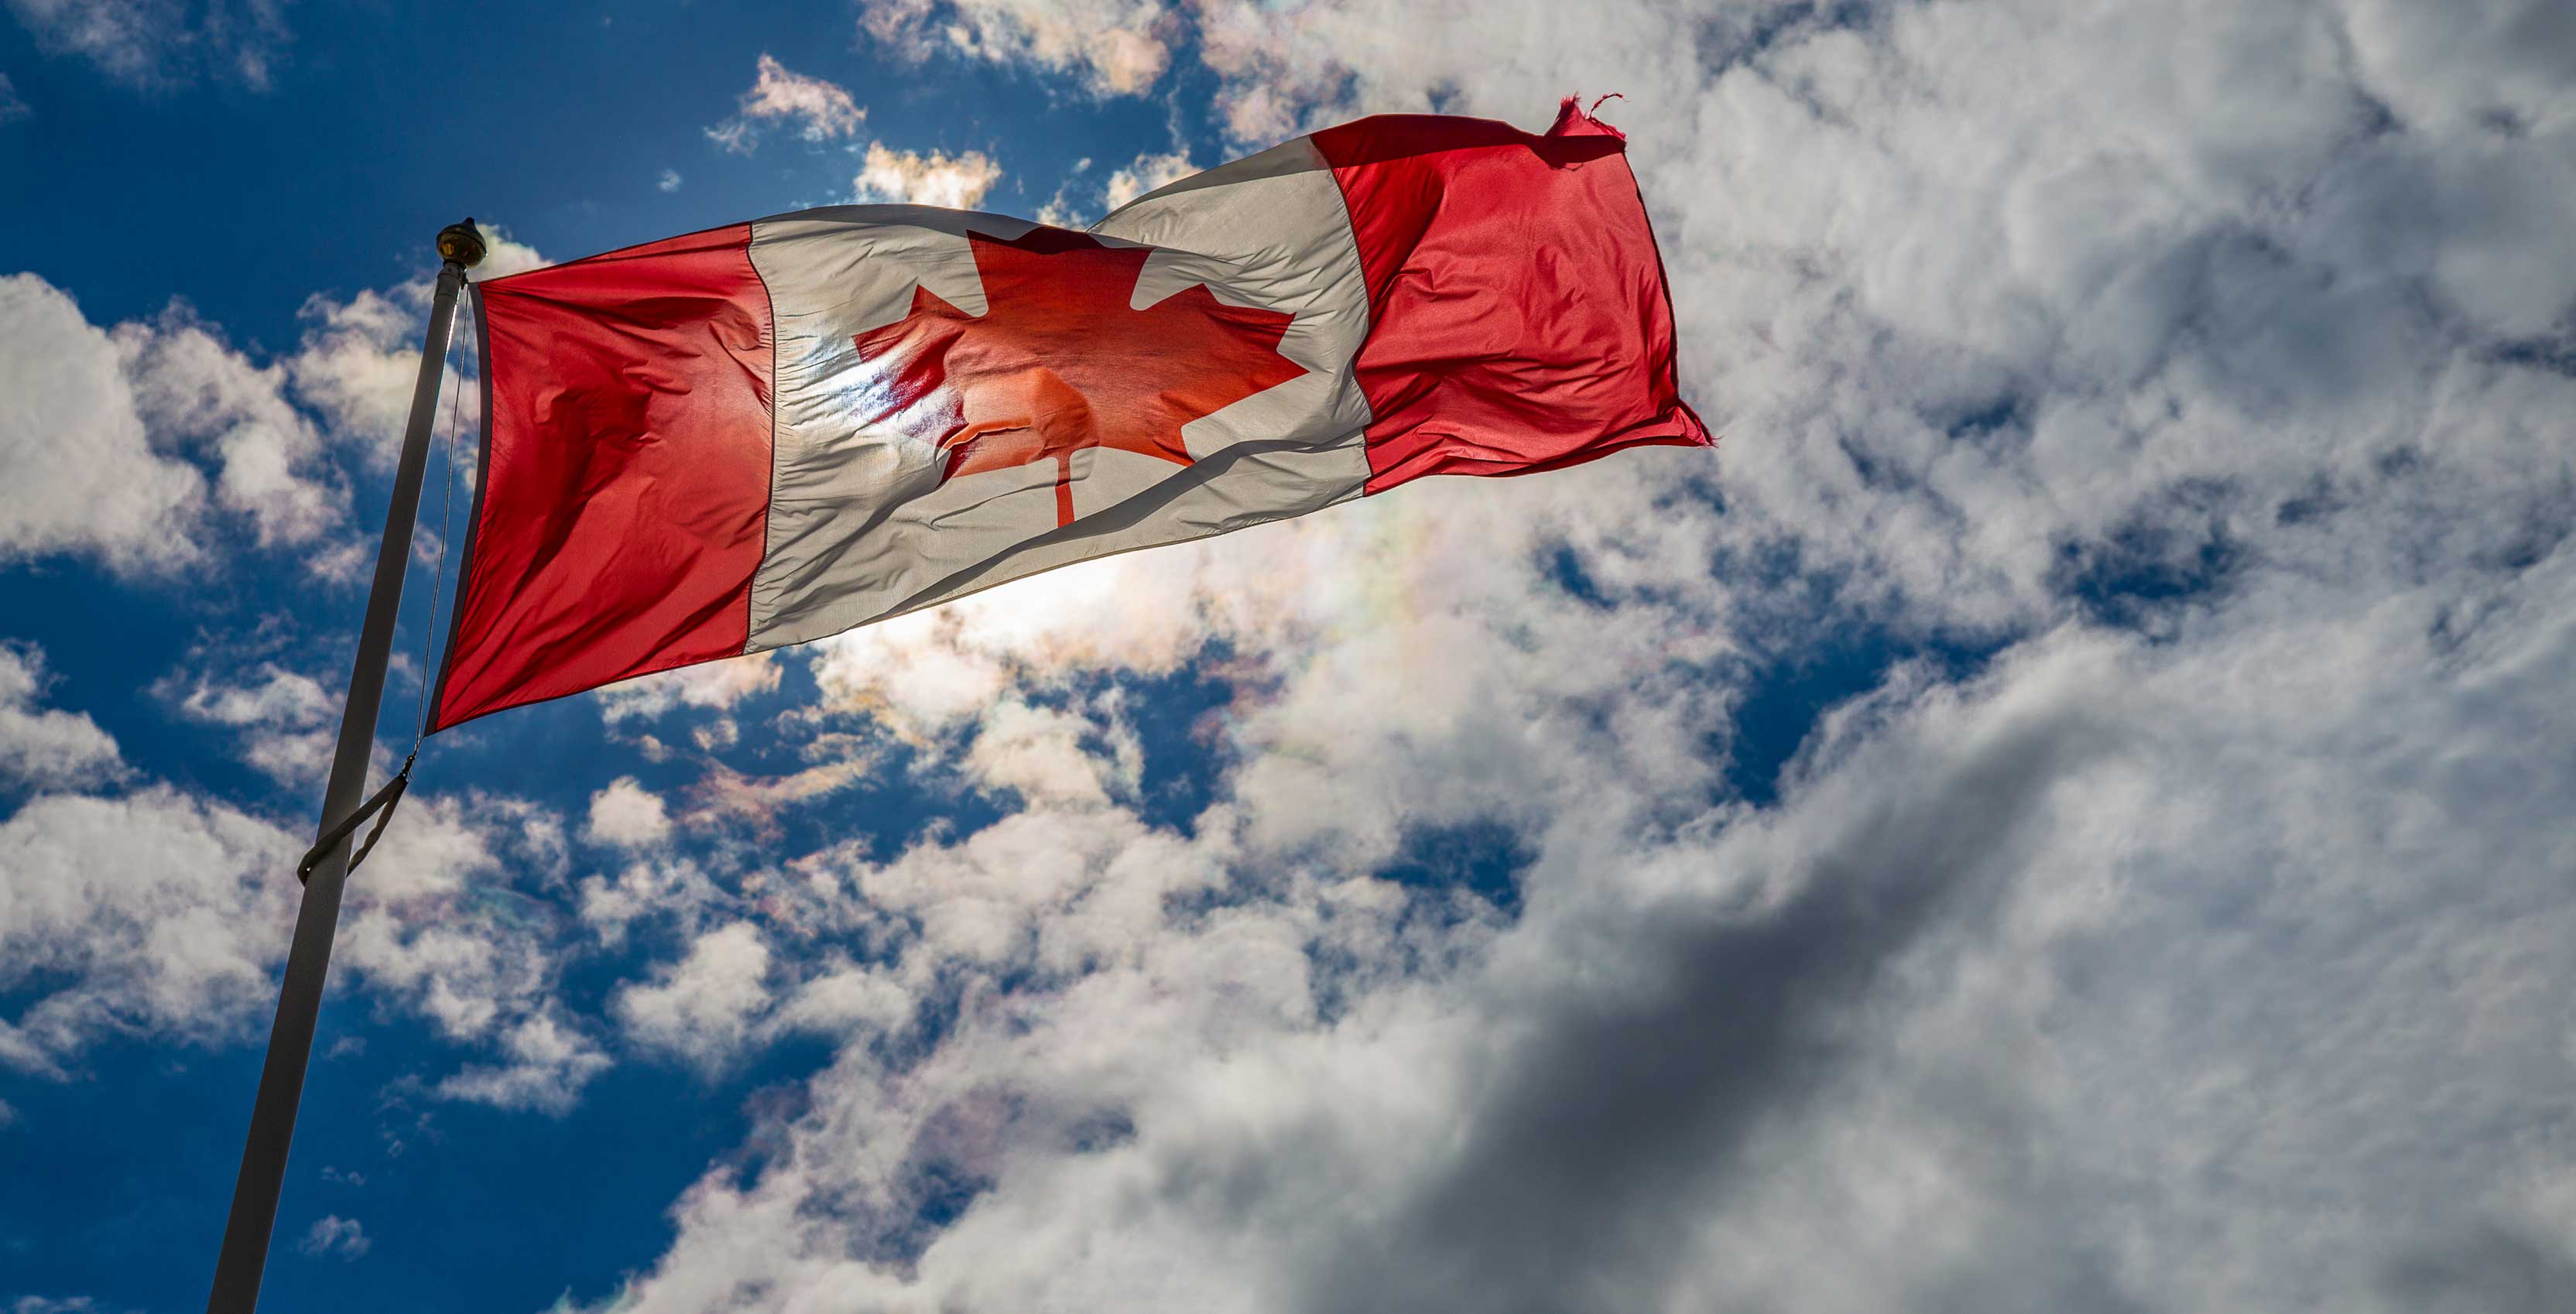 An image of the Canadian flag blowing in the wind against a backdrop of clouds